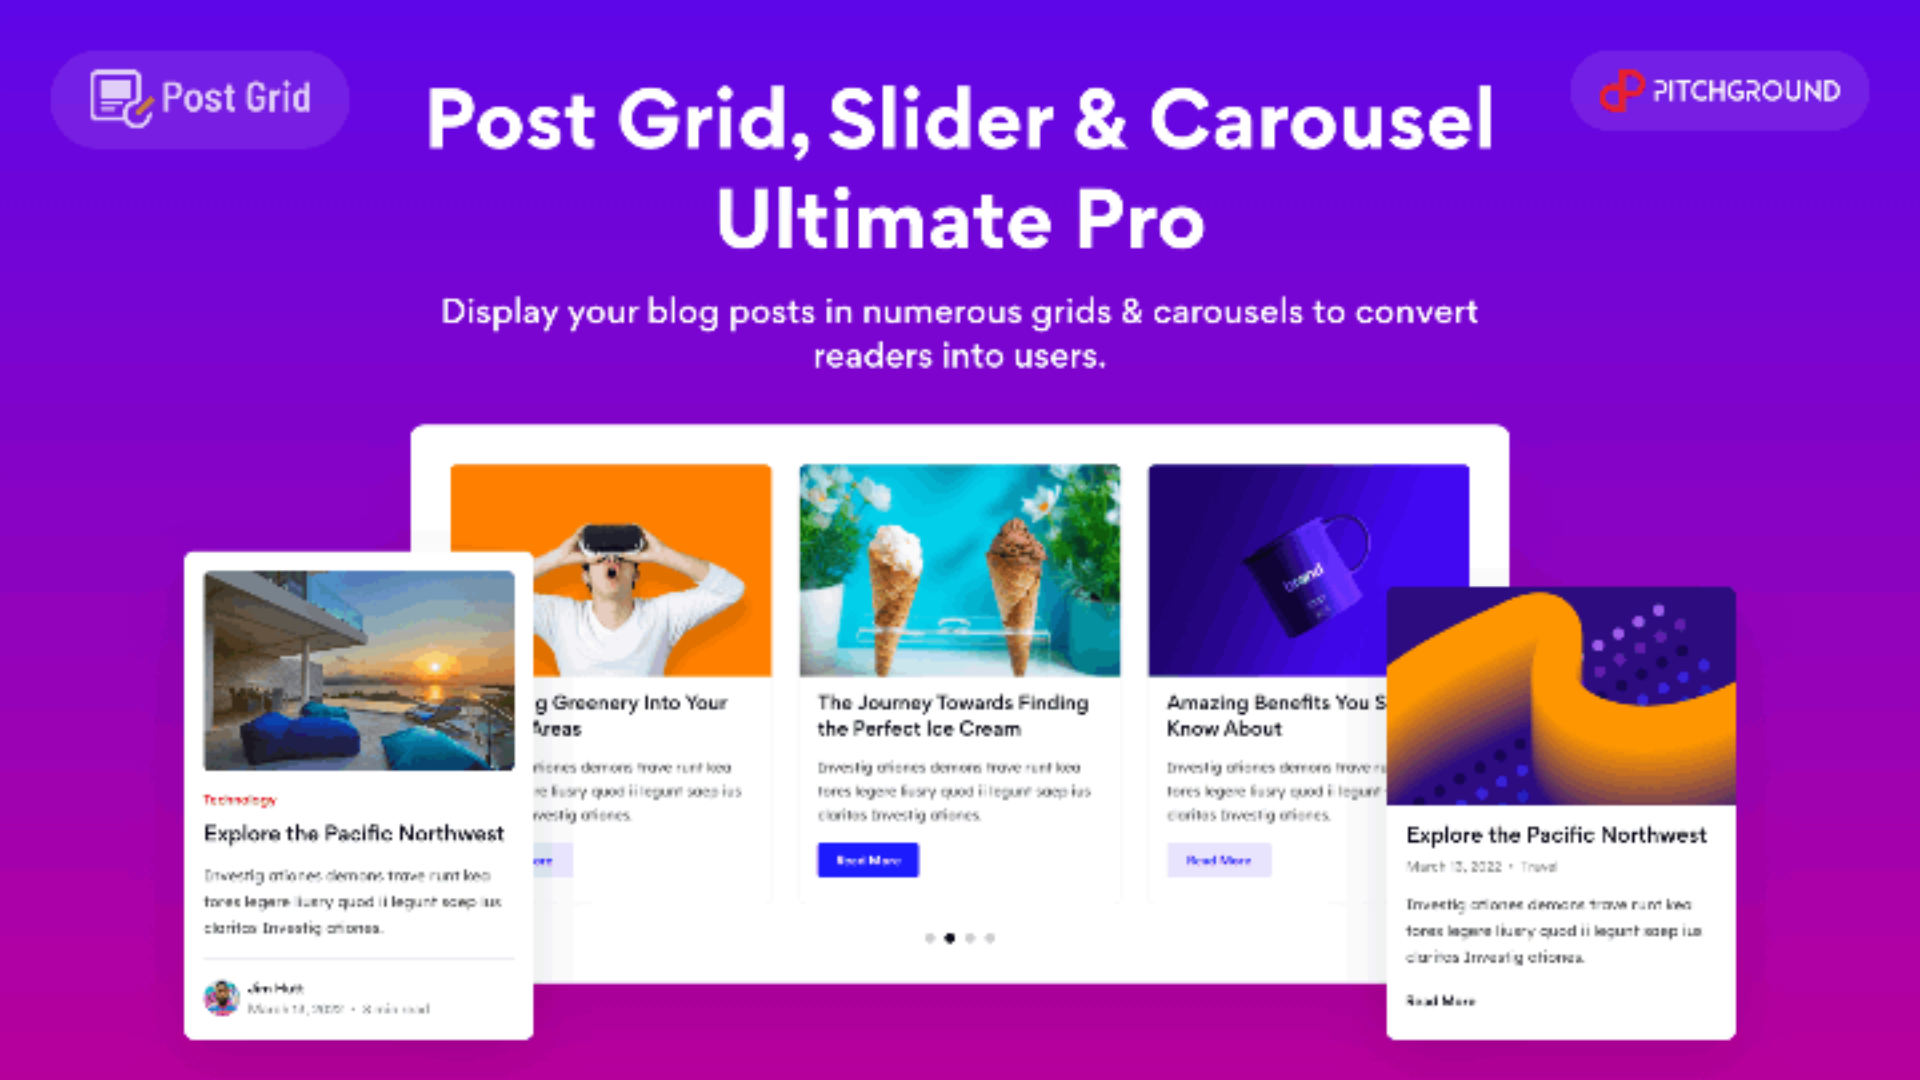 Lifetime Deal to Post Grid, Slider and Carousel Ultimate : Unlimited for $99